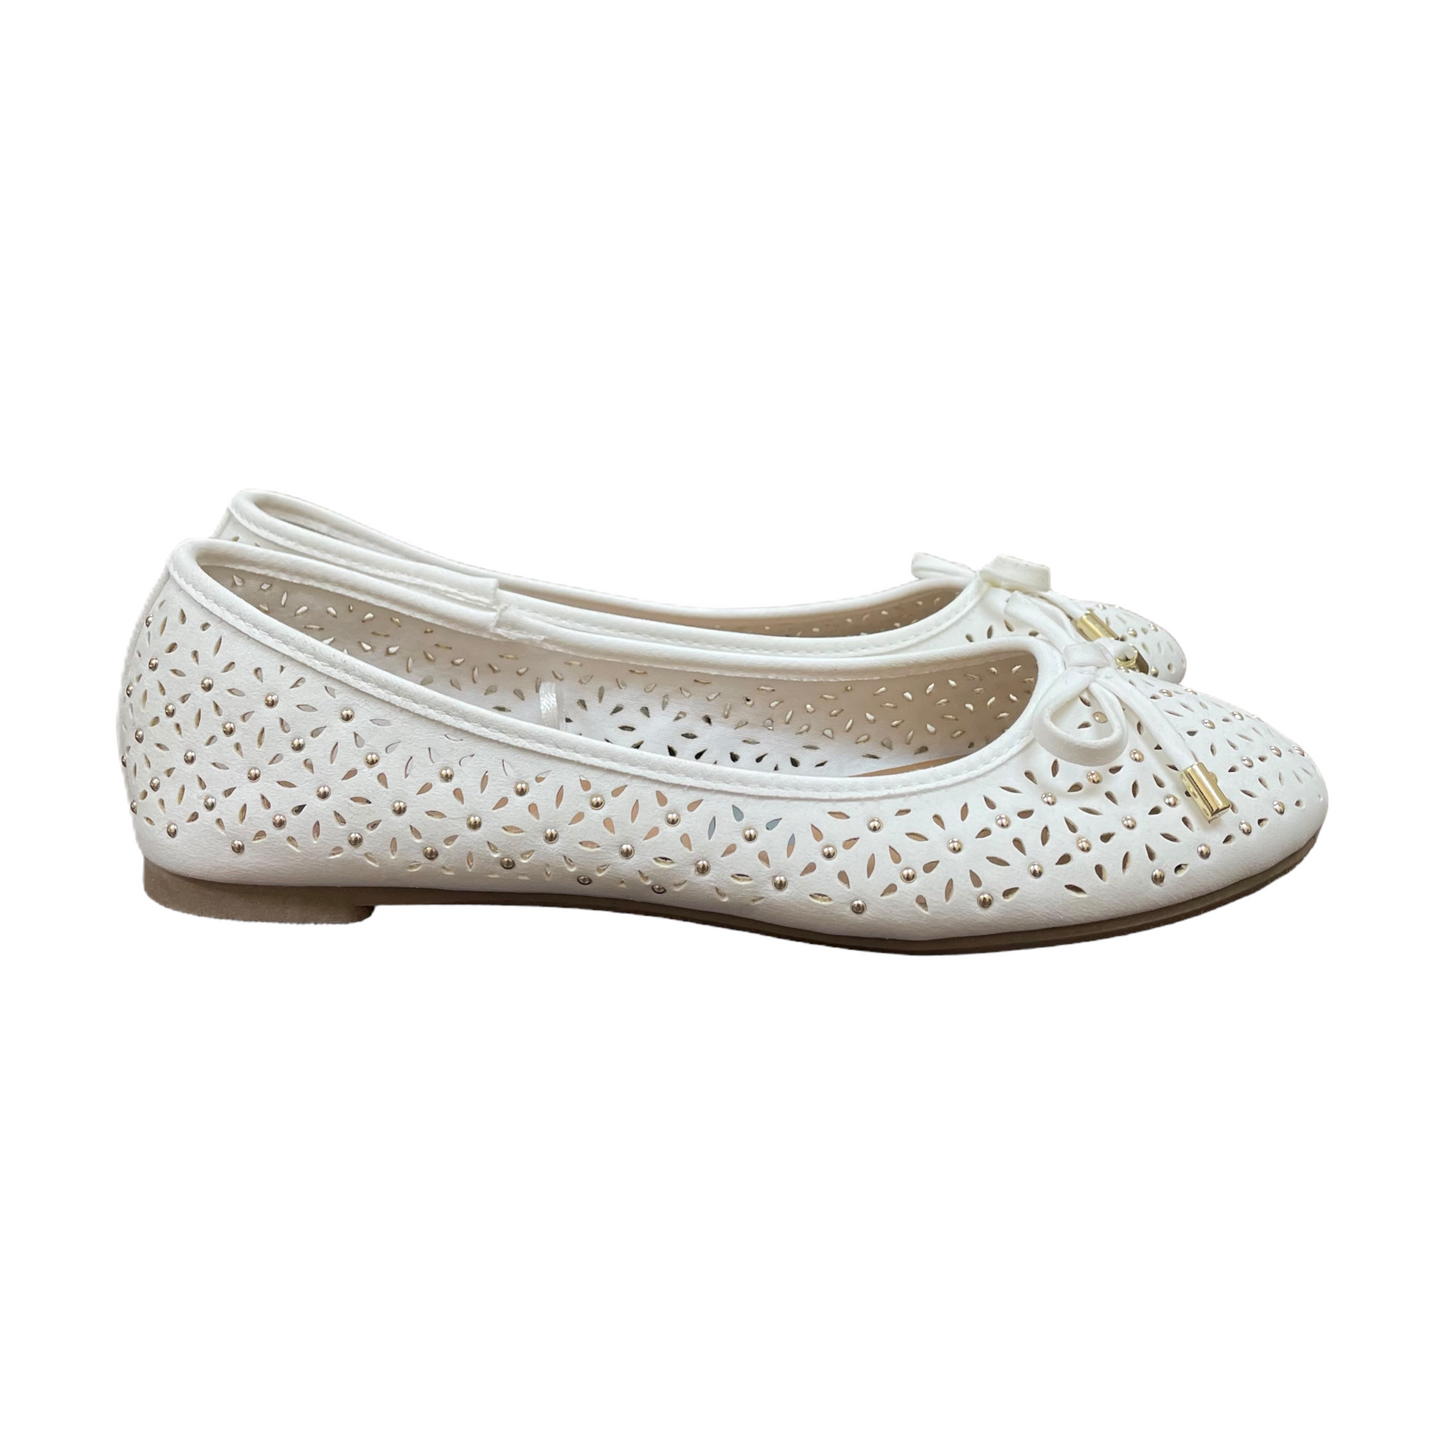 White Shoes Flats By Seychelles, Size: 7